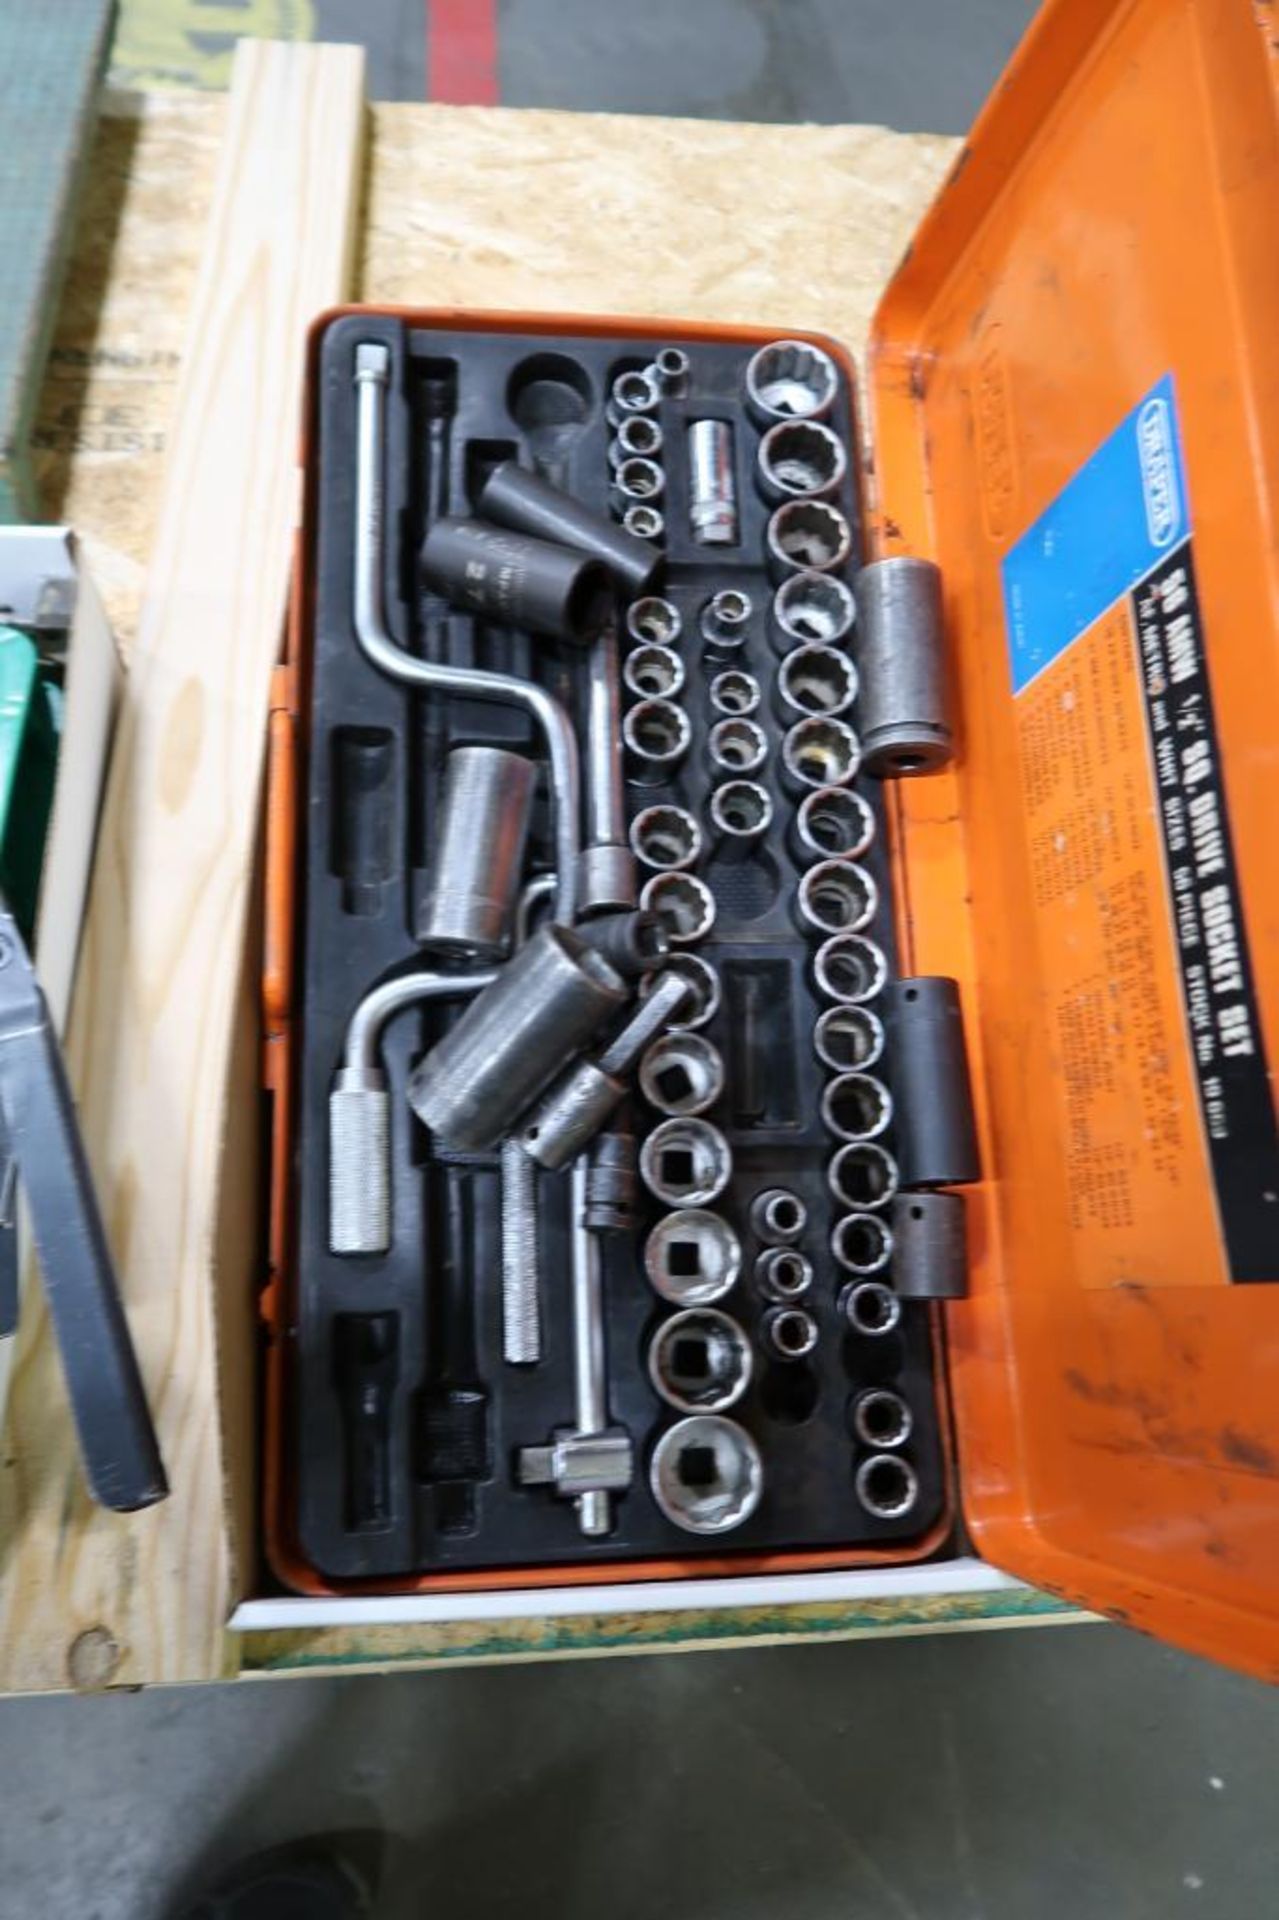 Box Lot of Drills, Electric Meter, Gas Leak Checker, Hand Tools, Number Stamps, Socket Set - Not Com - Image 5 of 6